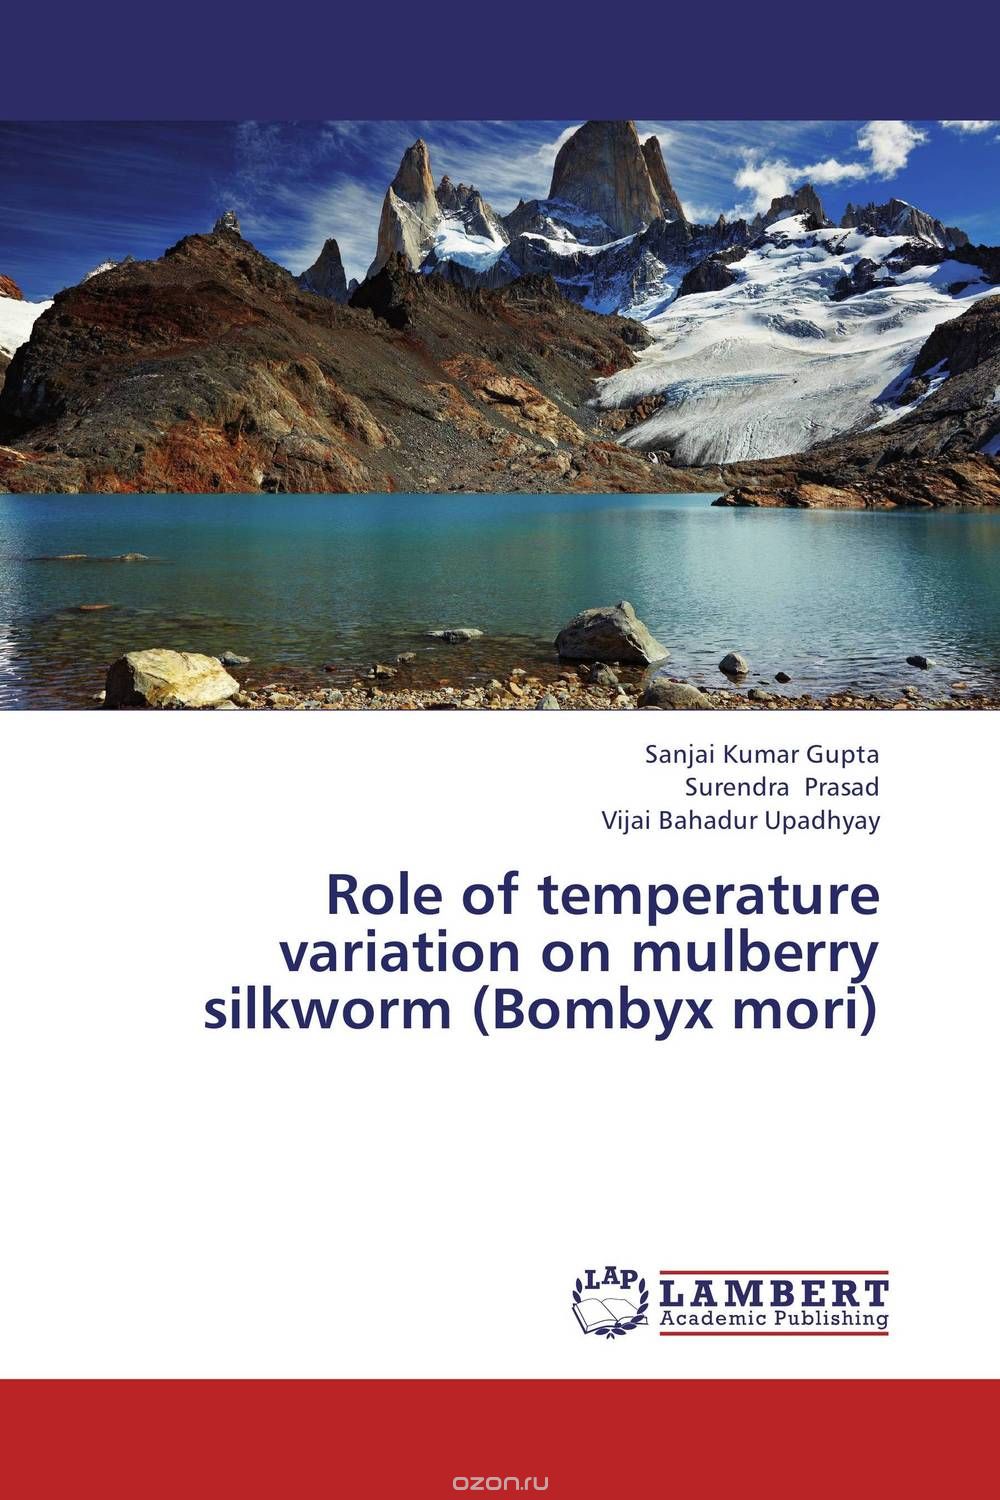 Role of temperature variation on mulberry silkworm (Bombyx mori)